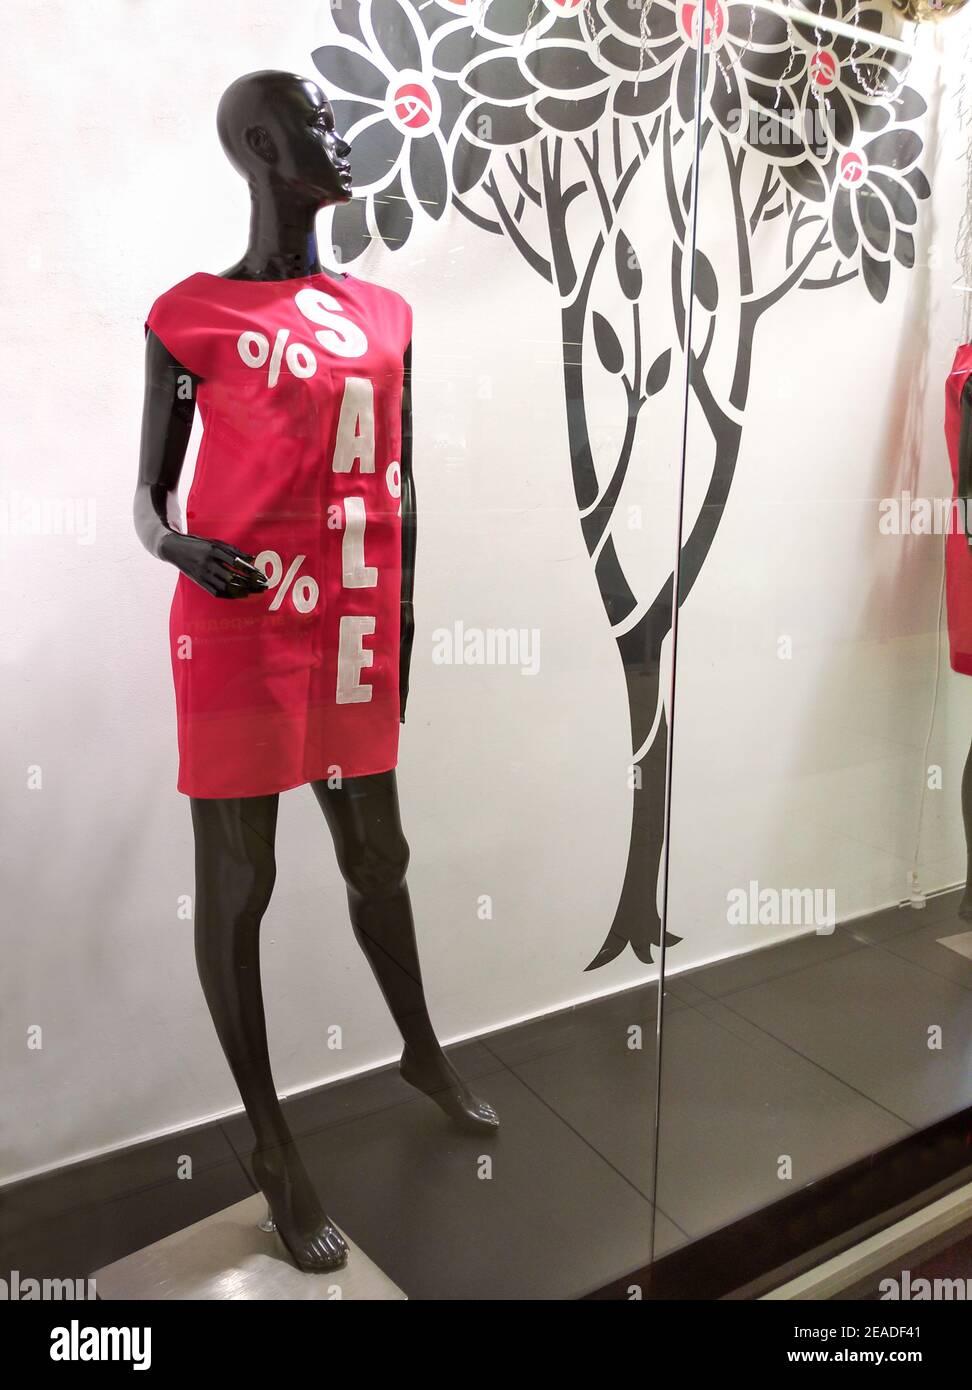 Women's Clothing Store Mannequins Dressed Stylish Clothes Shop Window Red  Stock Photo by ©fototota 365349674